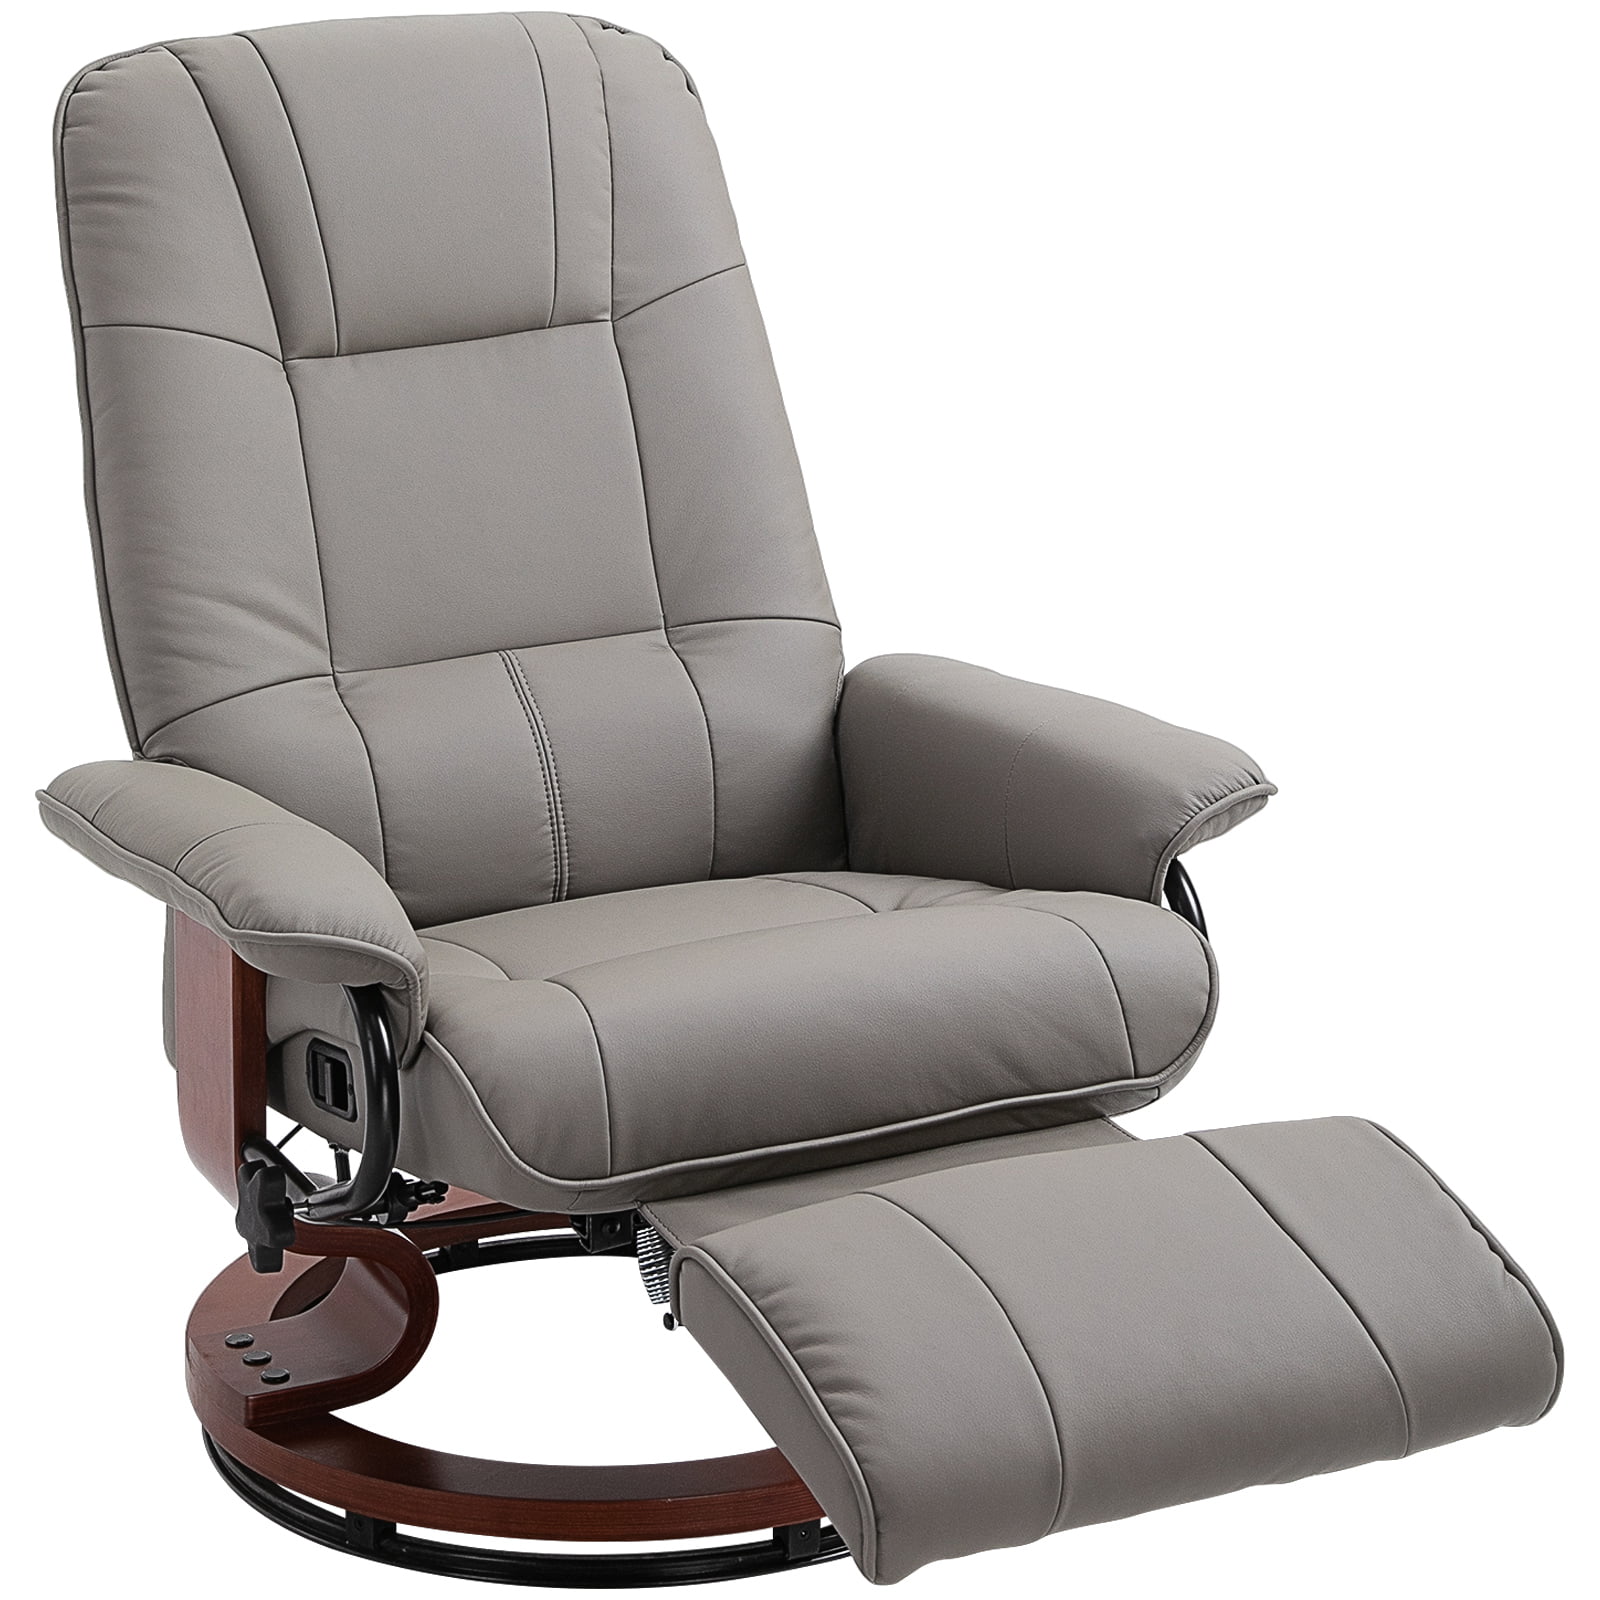 Homcom Faux Leather Adjustable Manual, Leather Reclining Swivel Chair